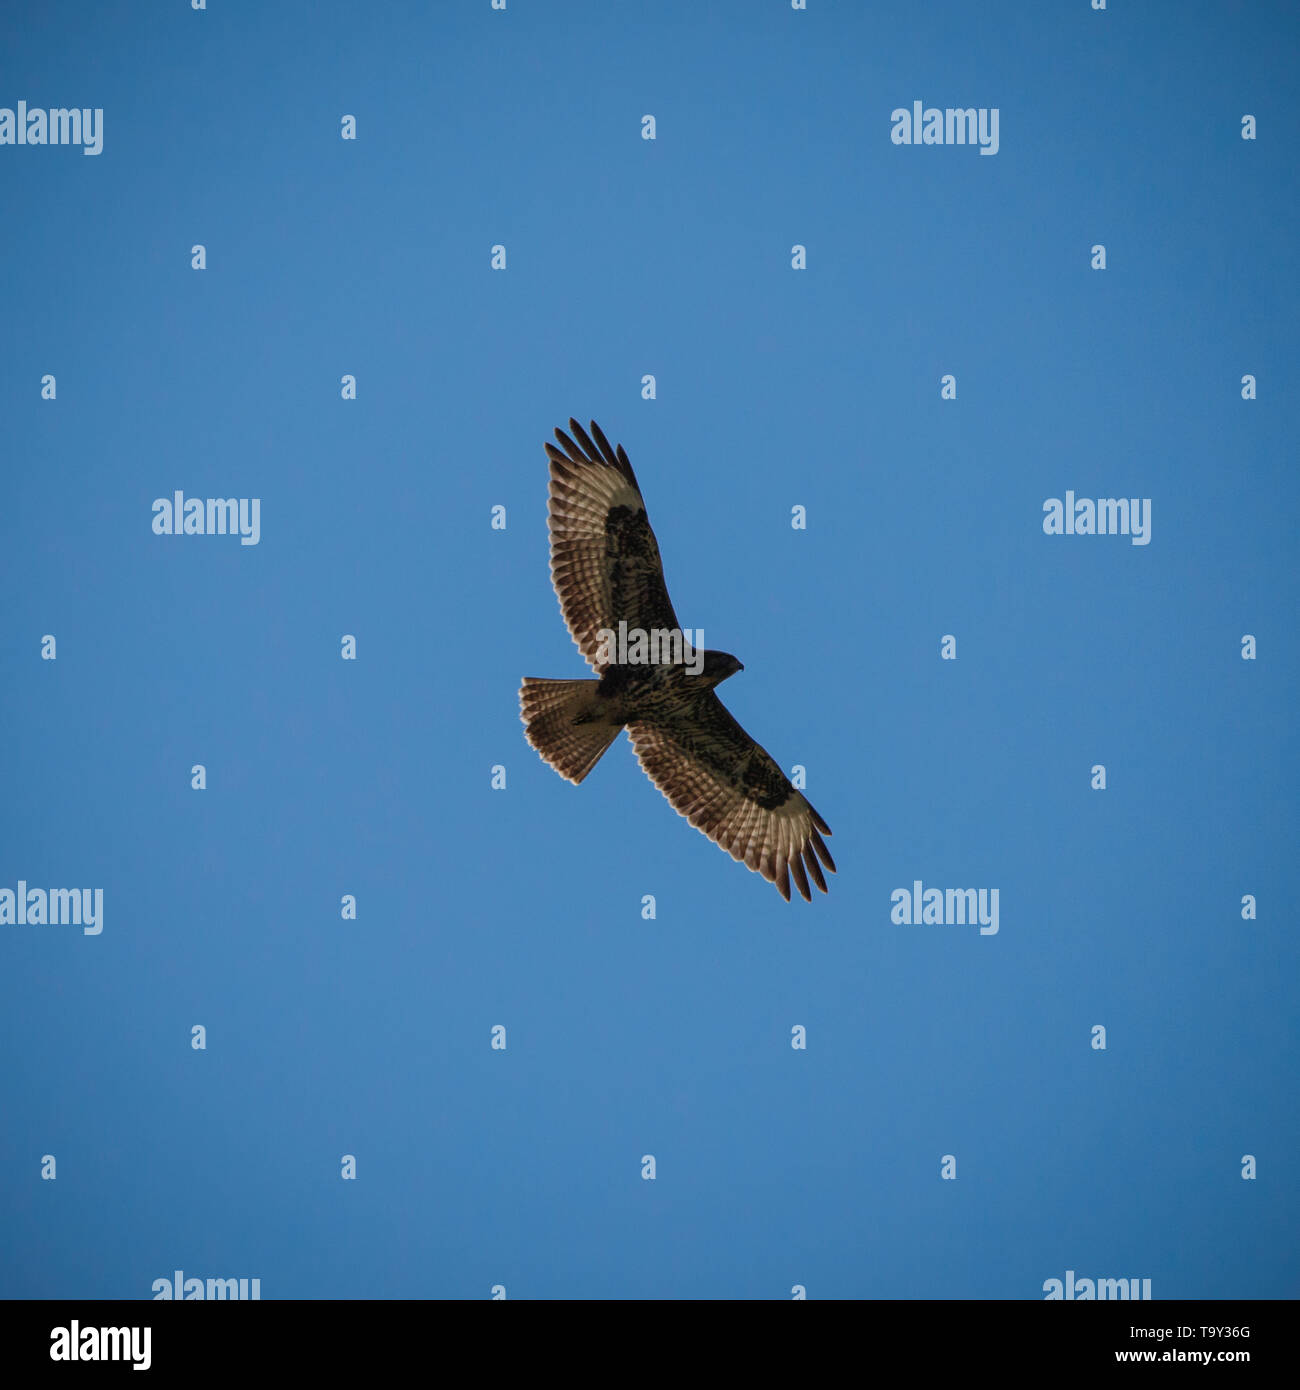 mighty eagle flying high in the beautiful blue cloudy sky showing its silhouette in spring Stock Photo